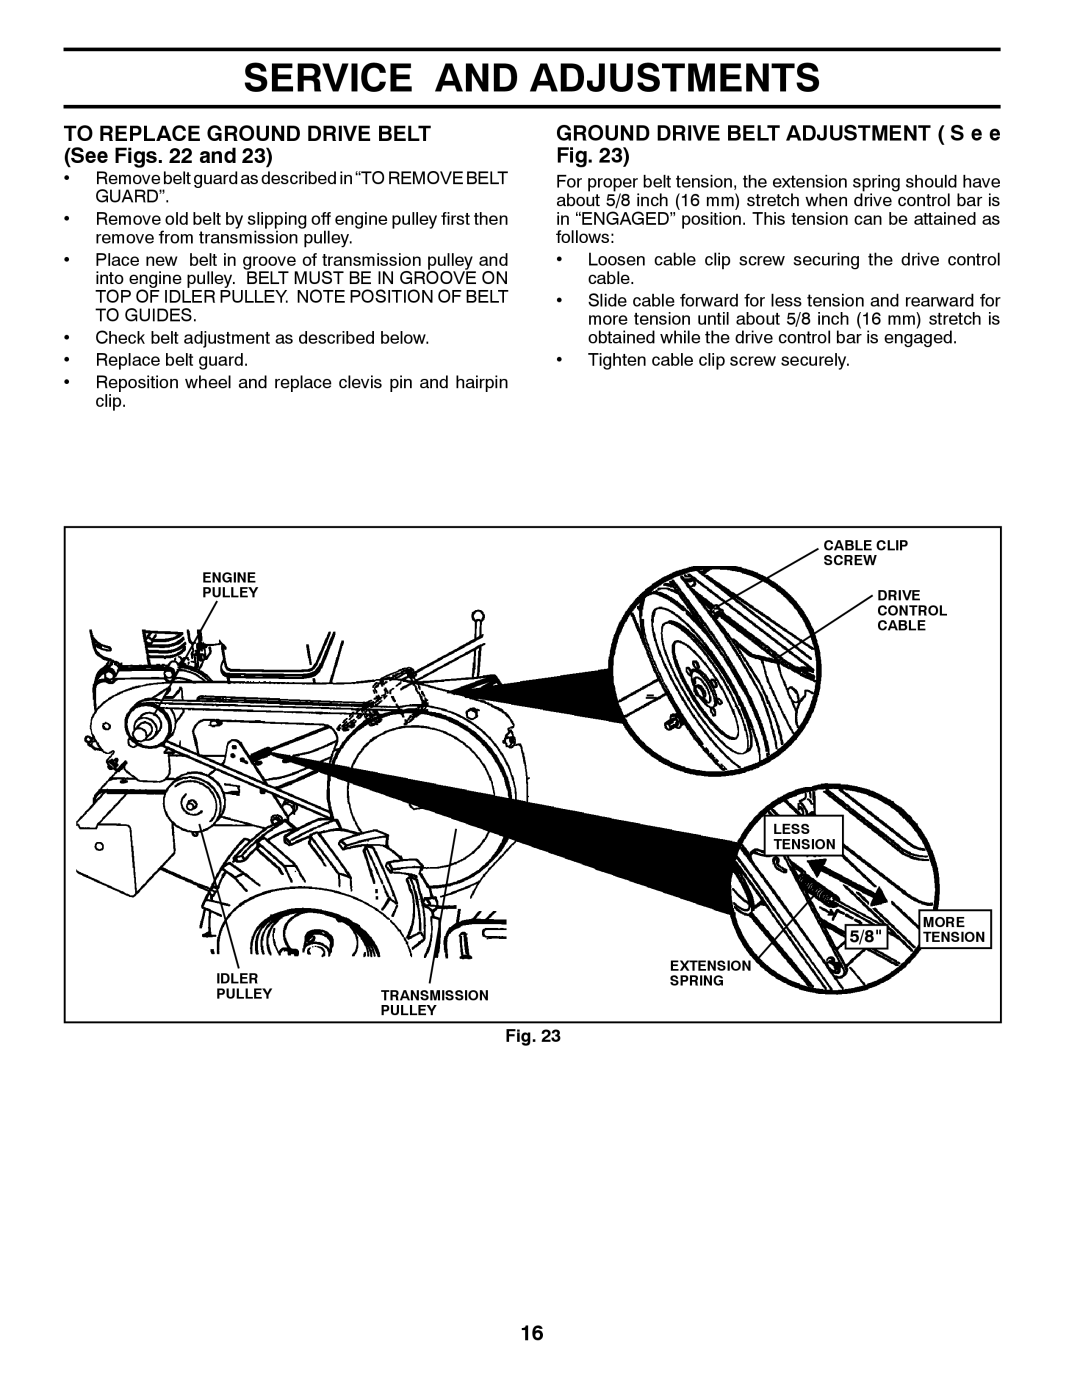 Poulan PRRT900 manual TO REPLACE GROUND DRIVE BELT See Figs. 22 and, GROUND DRIVE BELT ADJUSTMENT S e e Fig 